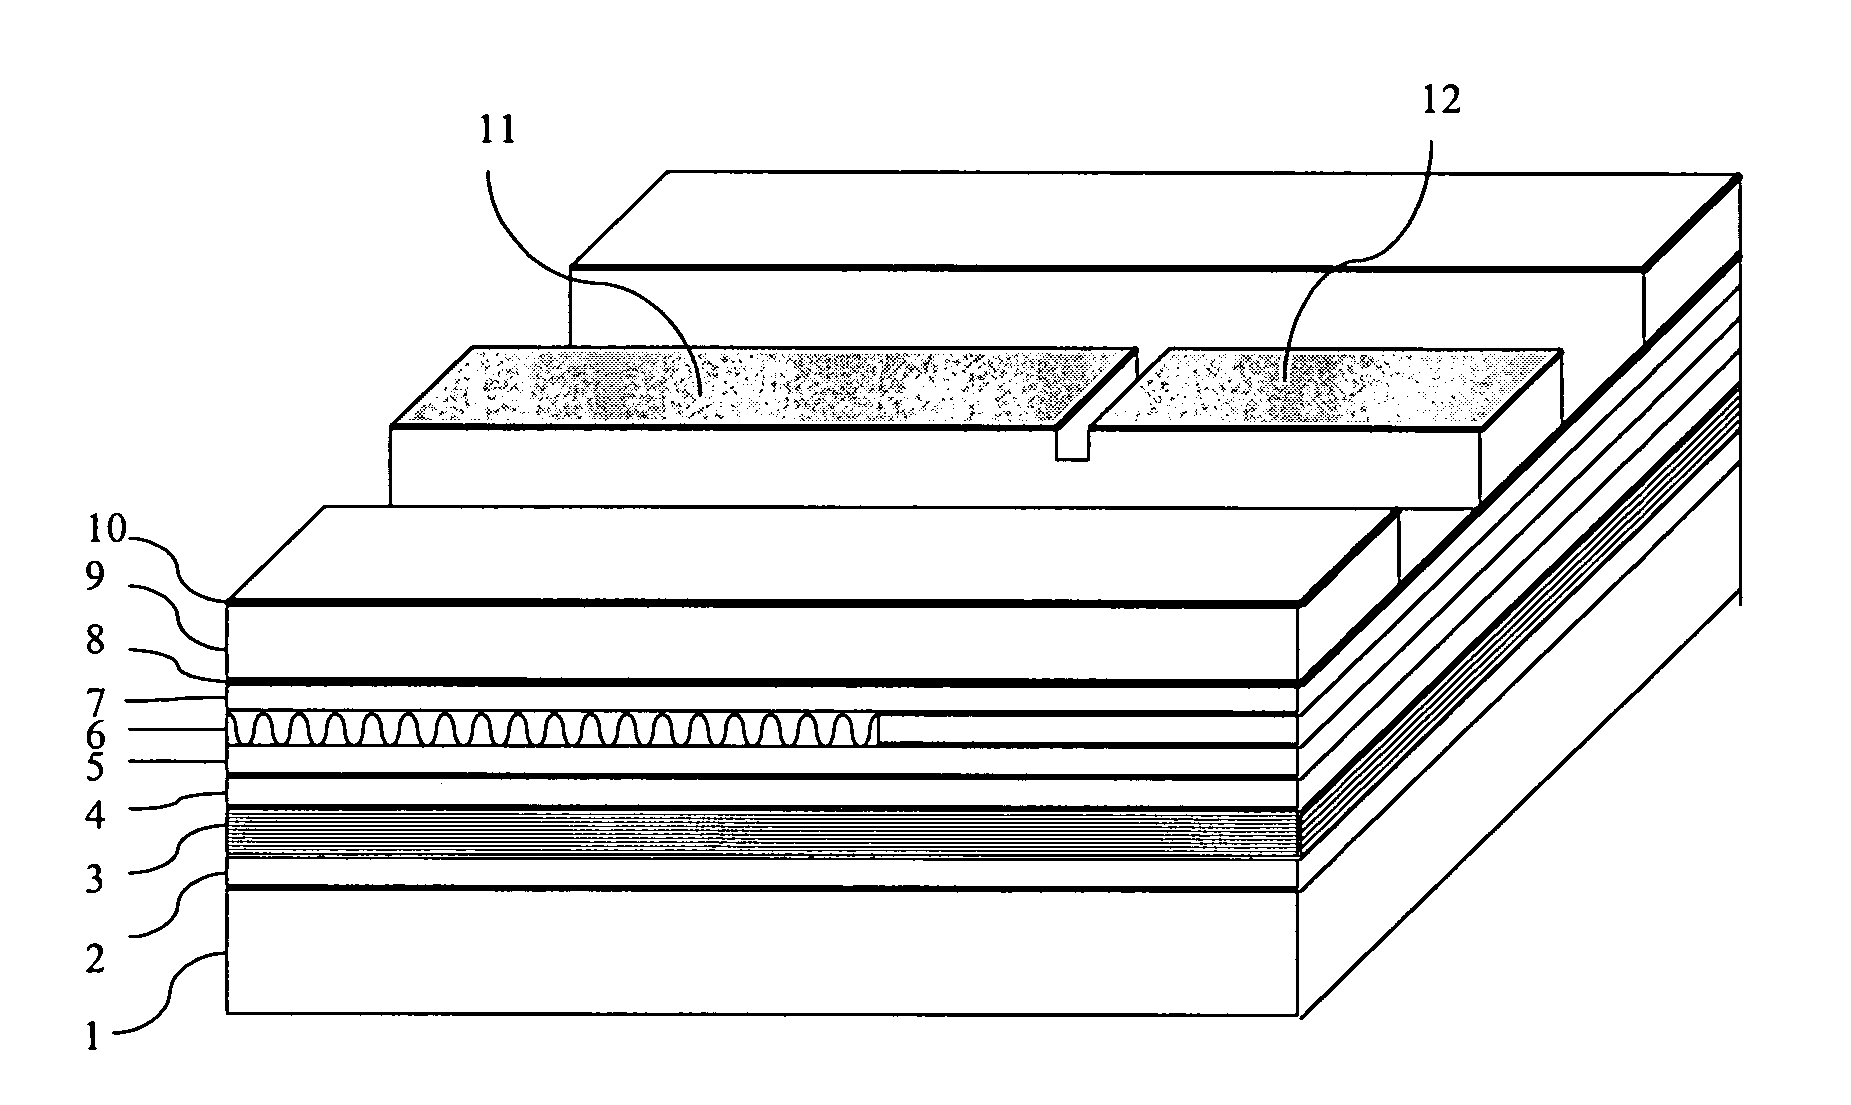 Semiconductor distributed feedback (DFB) laser array with integrated attenuator